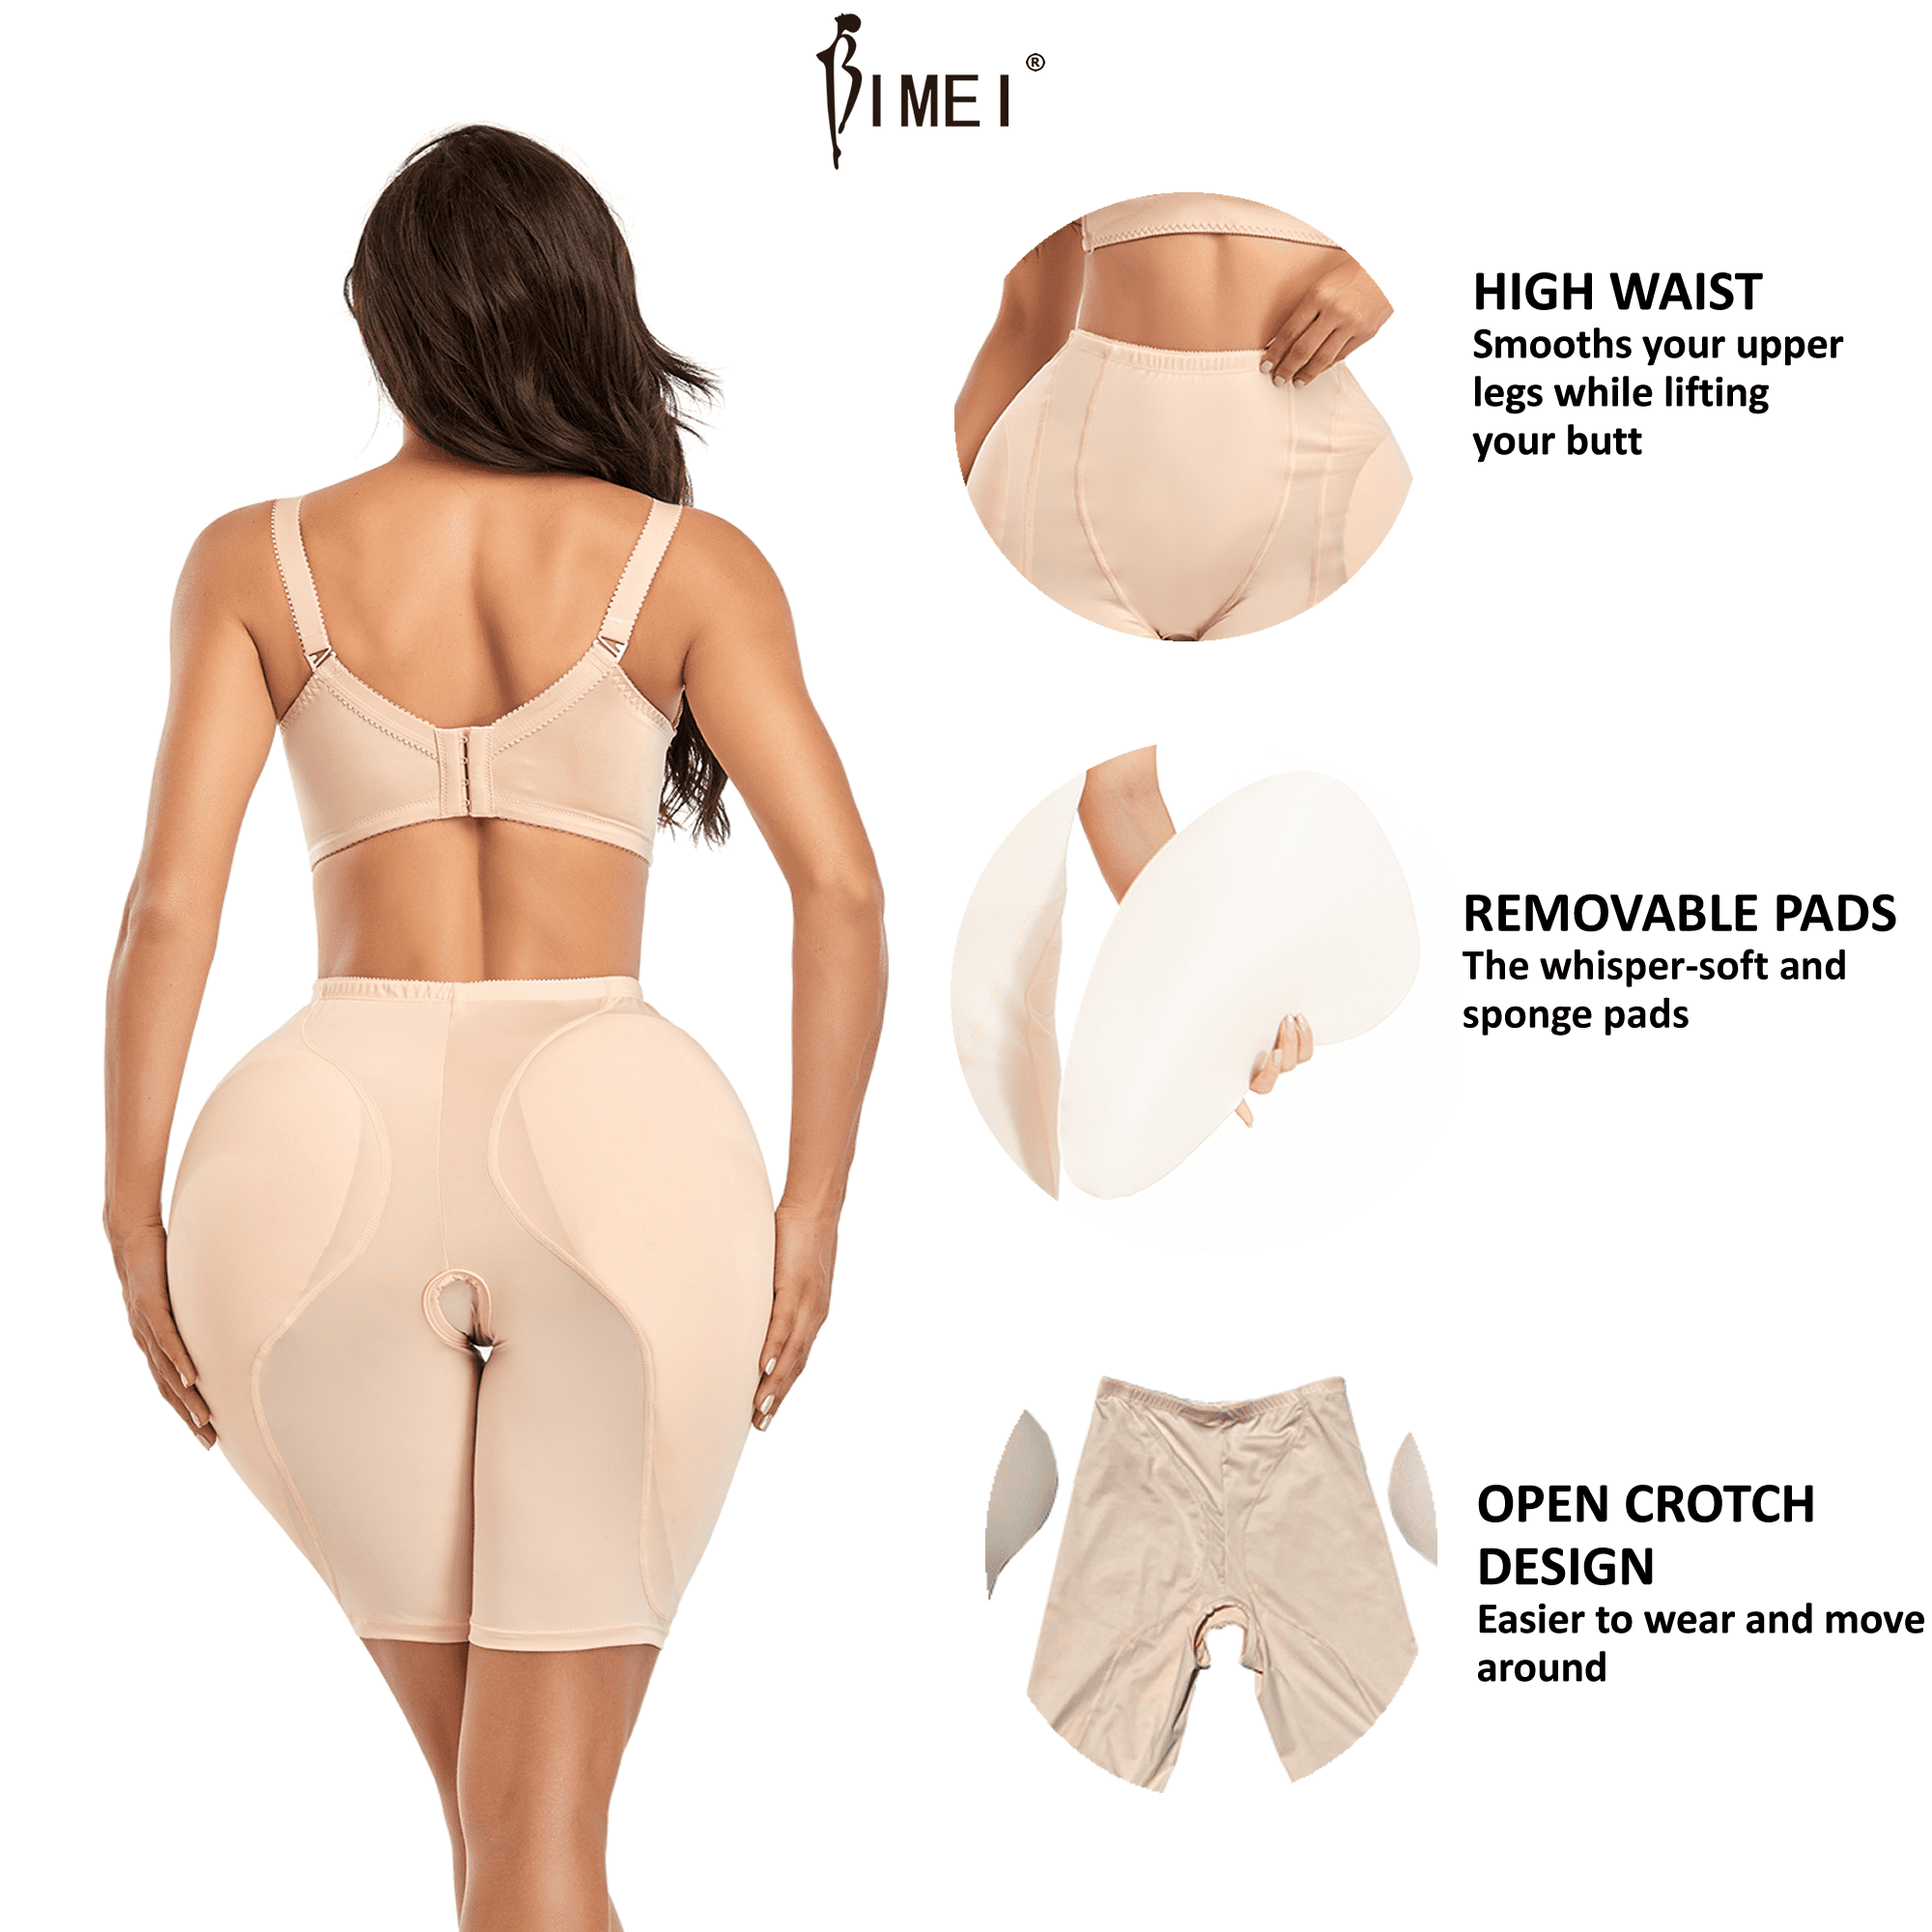 Sexy Lace High Waist Shapewear Panty With Double Control And Zipper Butt  Lifter And High Trainer Body Shaping Girdle Dress From Mang07, $10.66